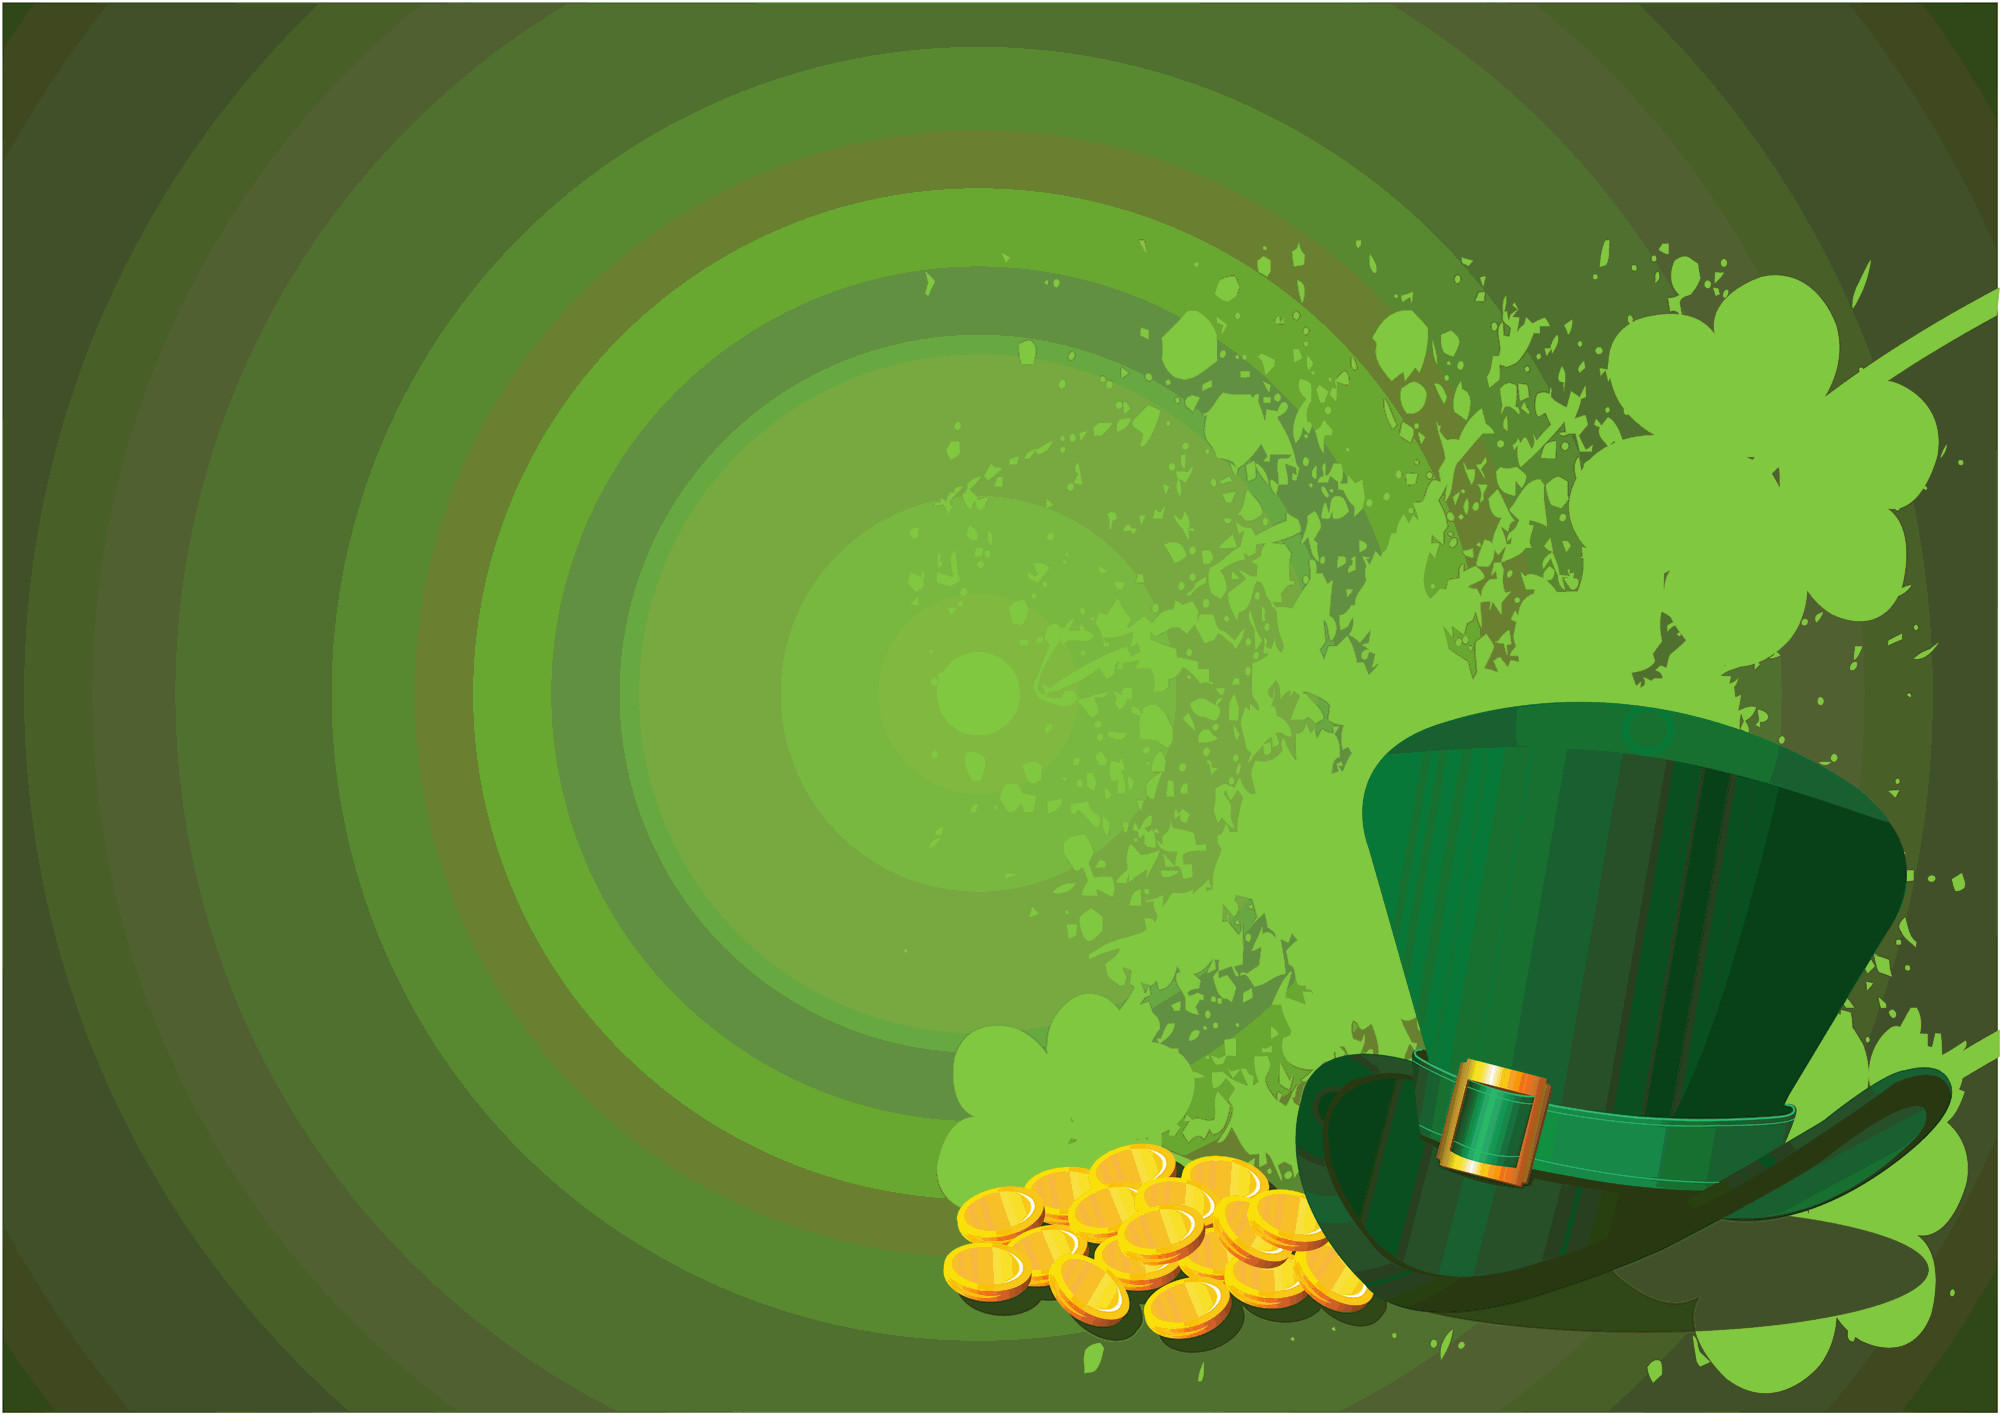 2000x1415 related posts st patrick s day whatsapp backgrounds st patrick s day .